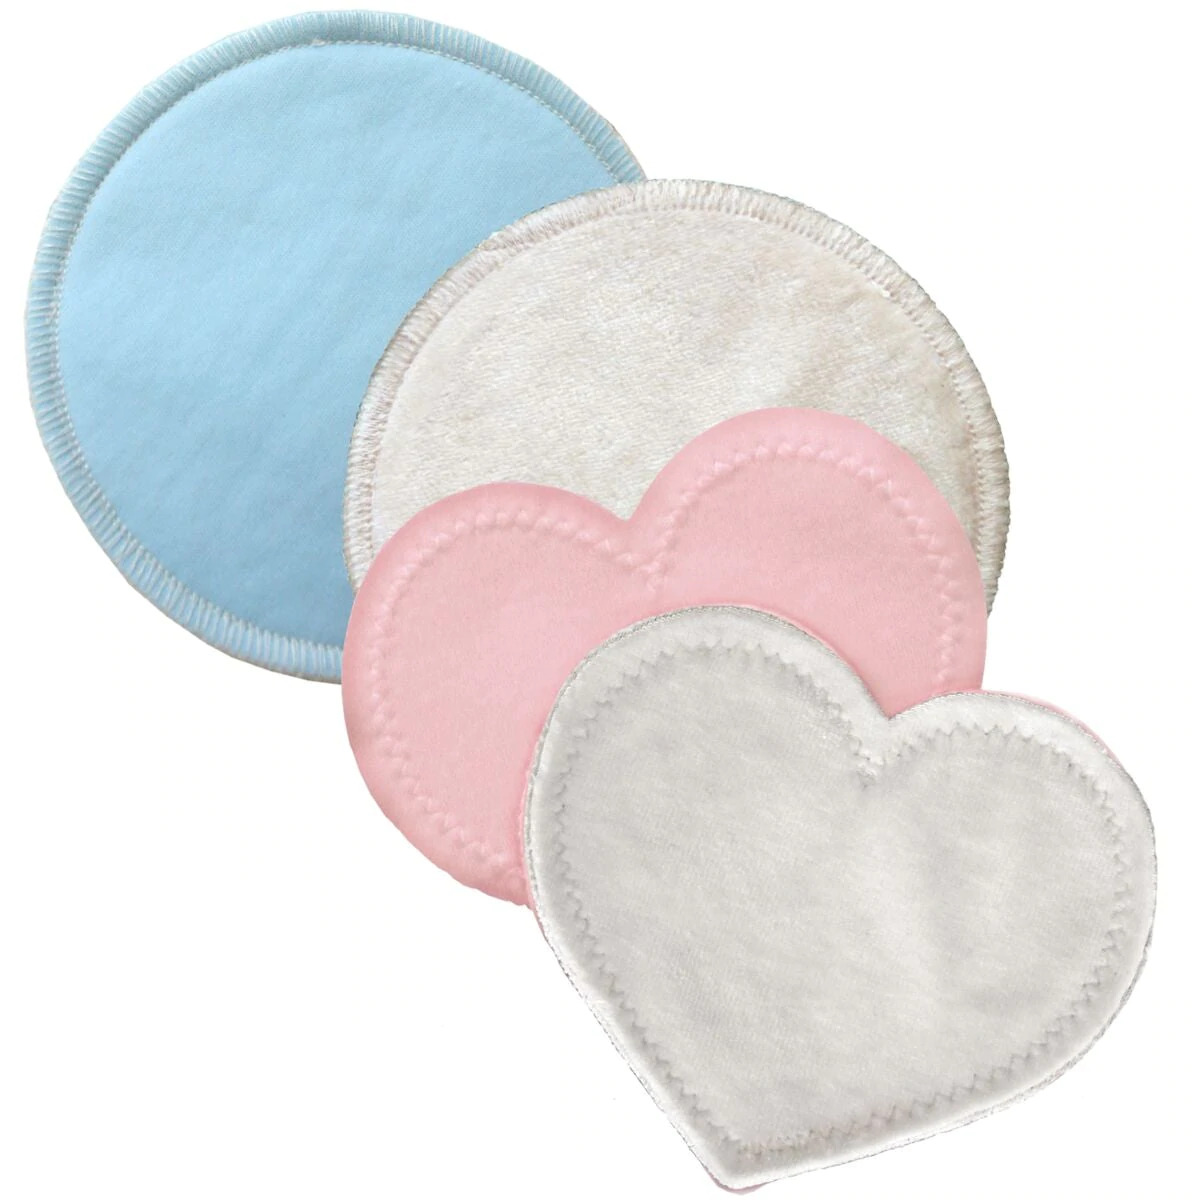 Momcozy Breast Pads for Breastfeeding Bamboo Fiber, 80pcs, Other